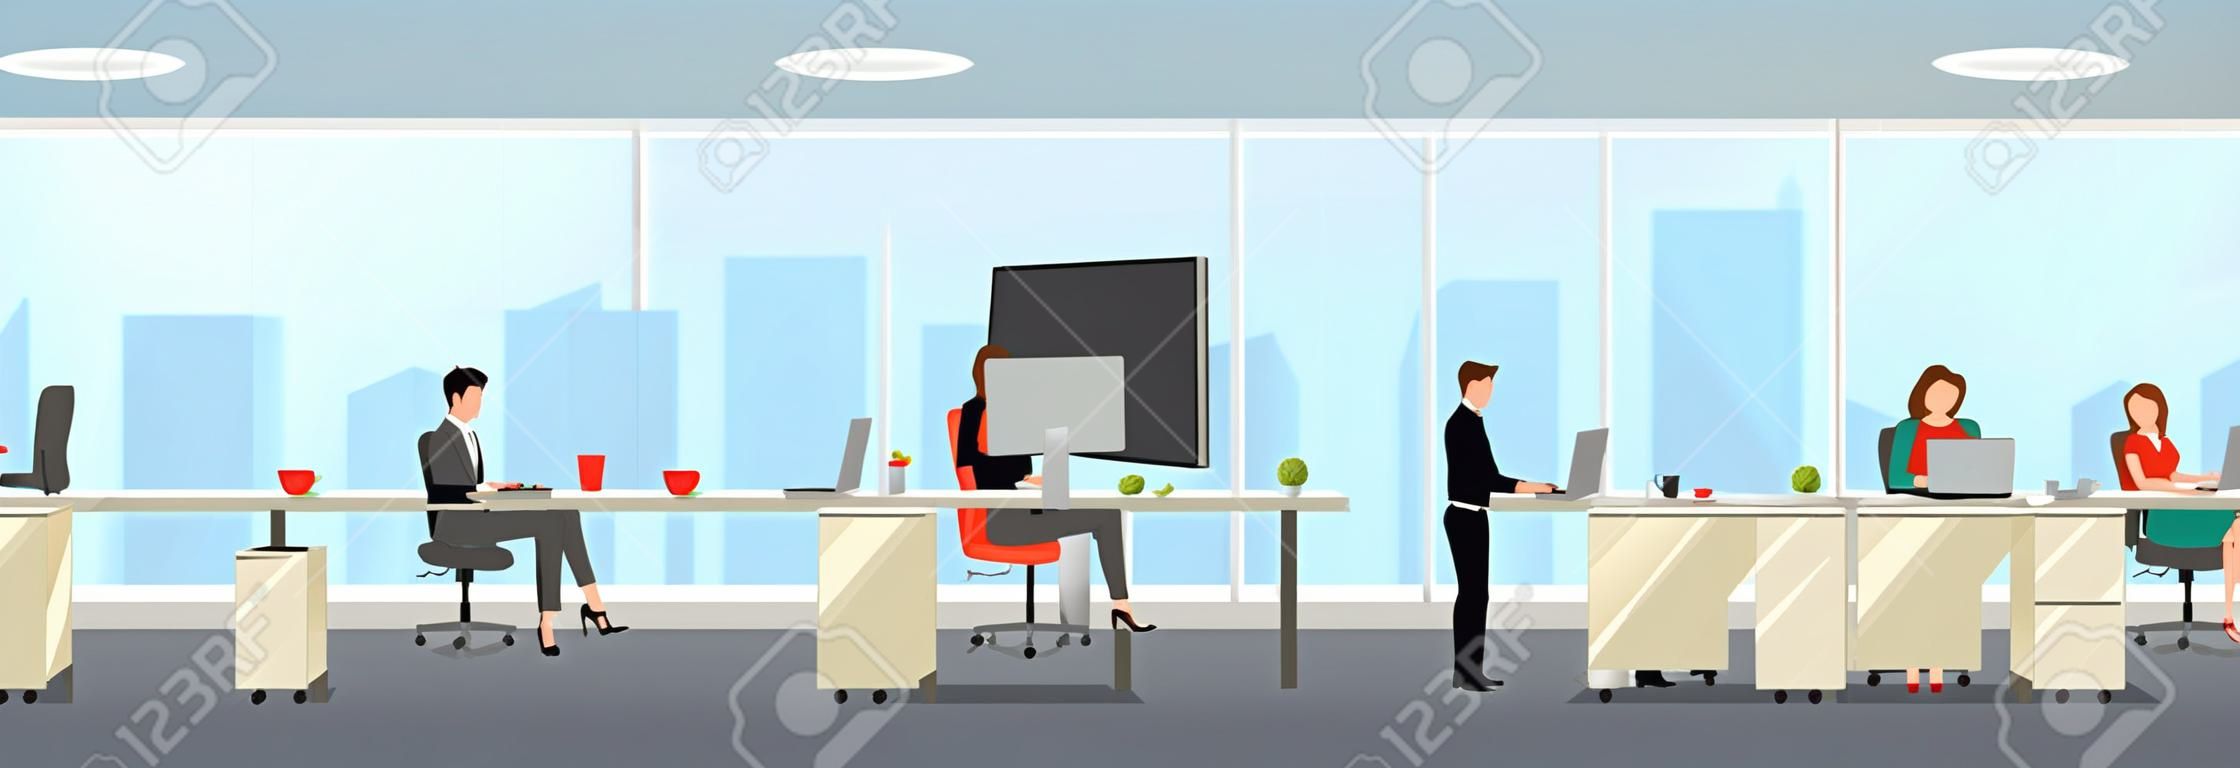 Modern office interior with employees. Creative office workspace with big window, furniture in interior, desktop, laptop.